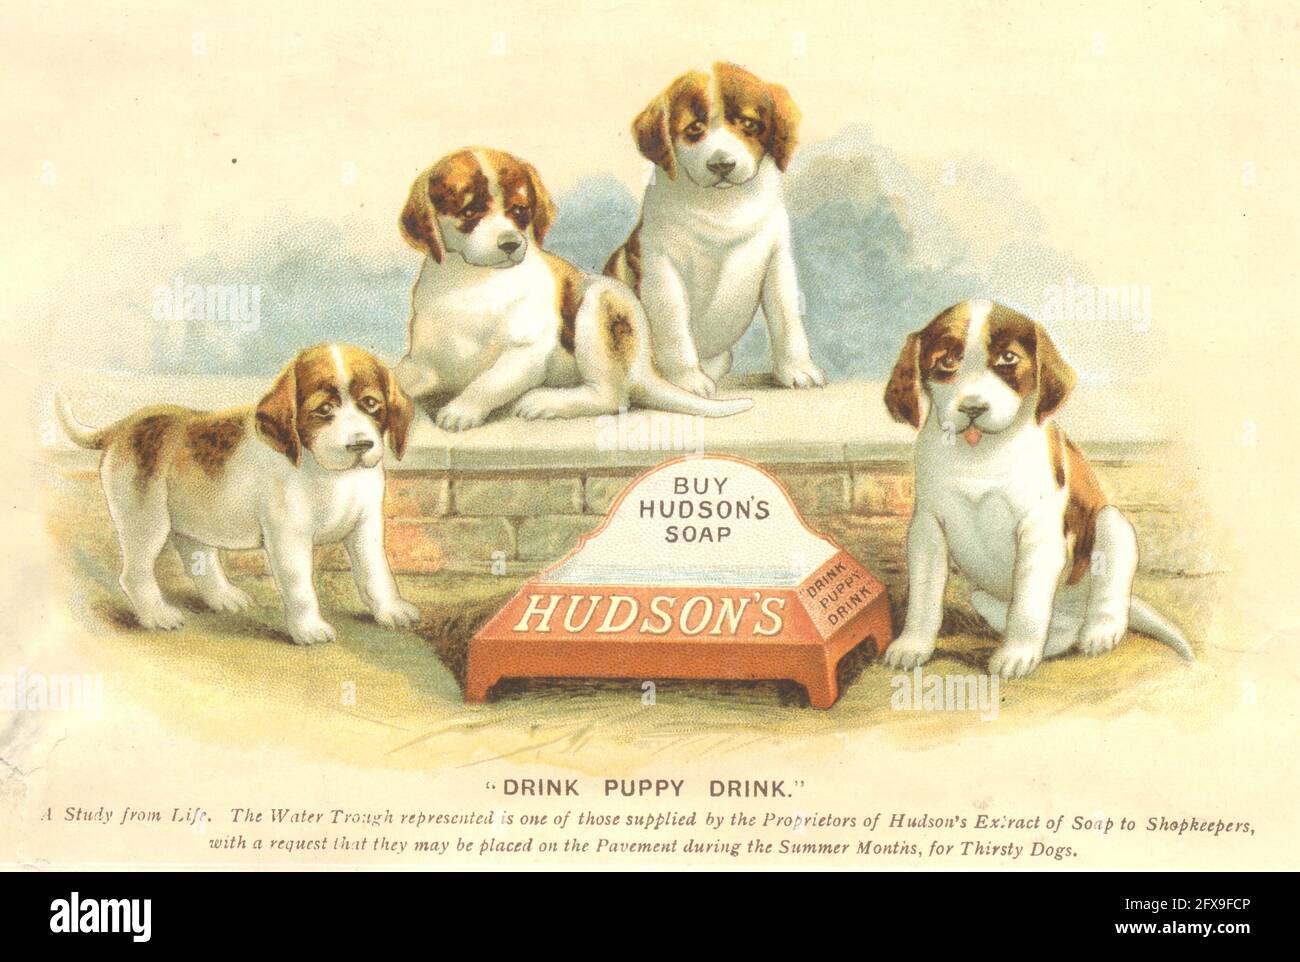 Chromolithographed advertisement showing puppies round a water trough which was a give away to shopkeepers to advertise Hudson's Soap circa 1895 'with a request that it be placed on the Pavement during the summer Months for Thirsty Dogs.' Stock Photo